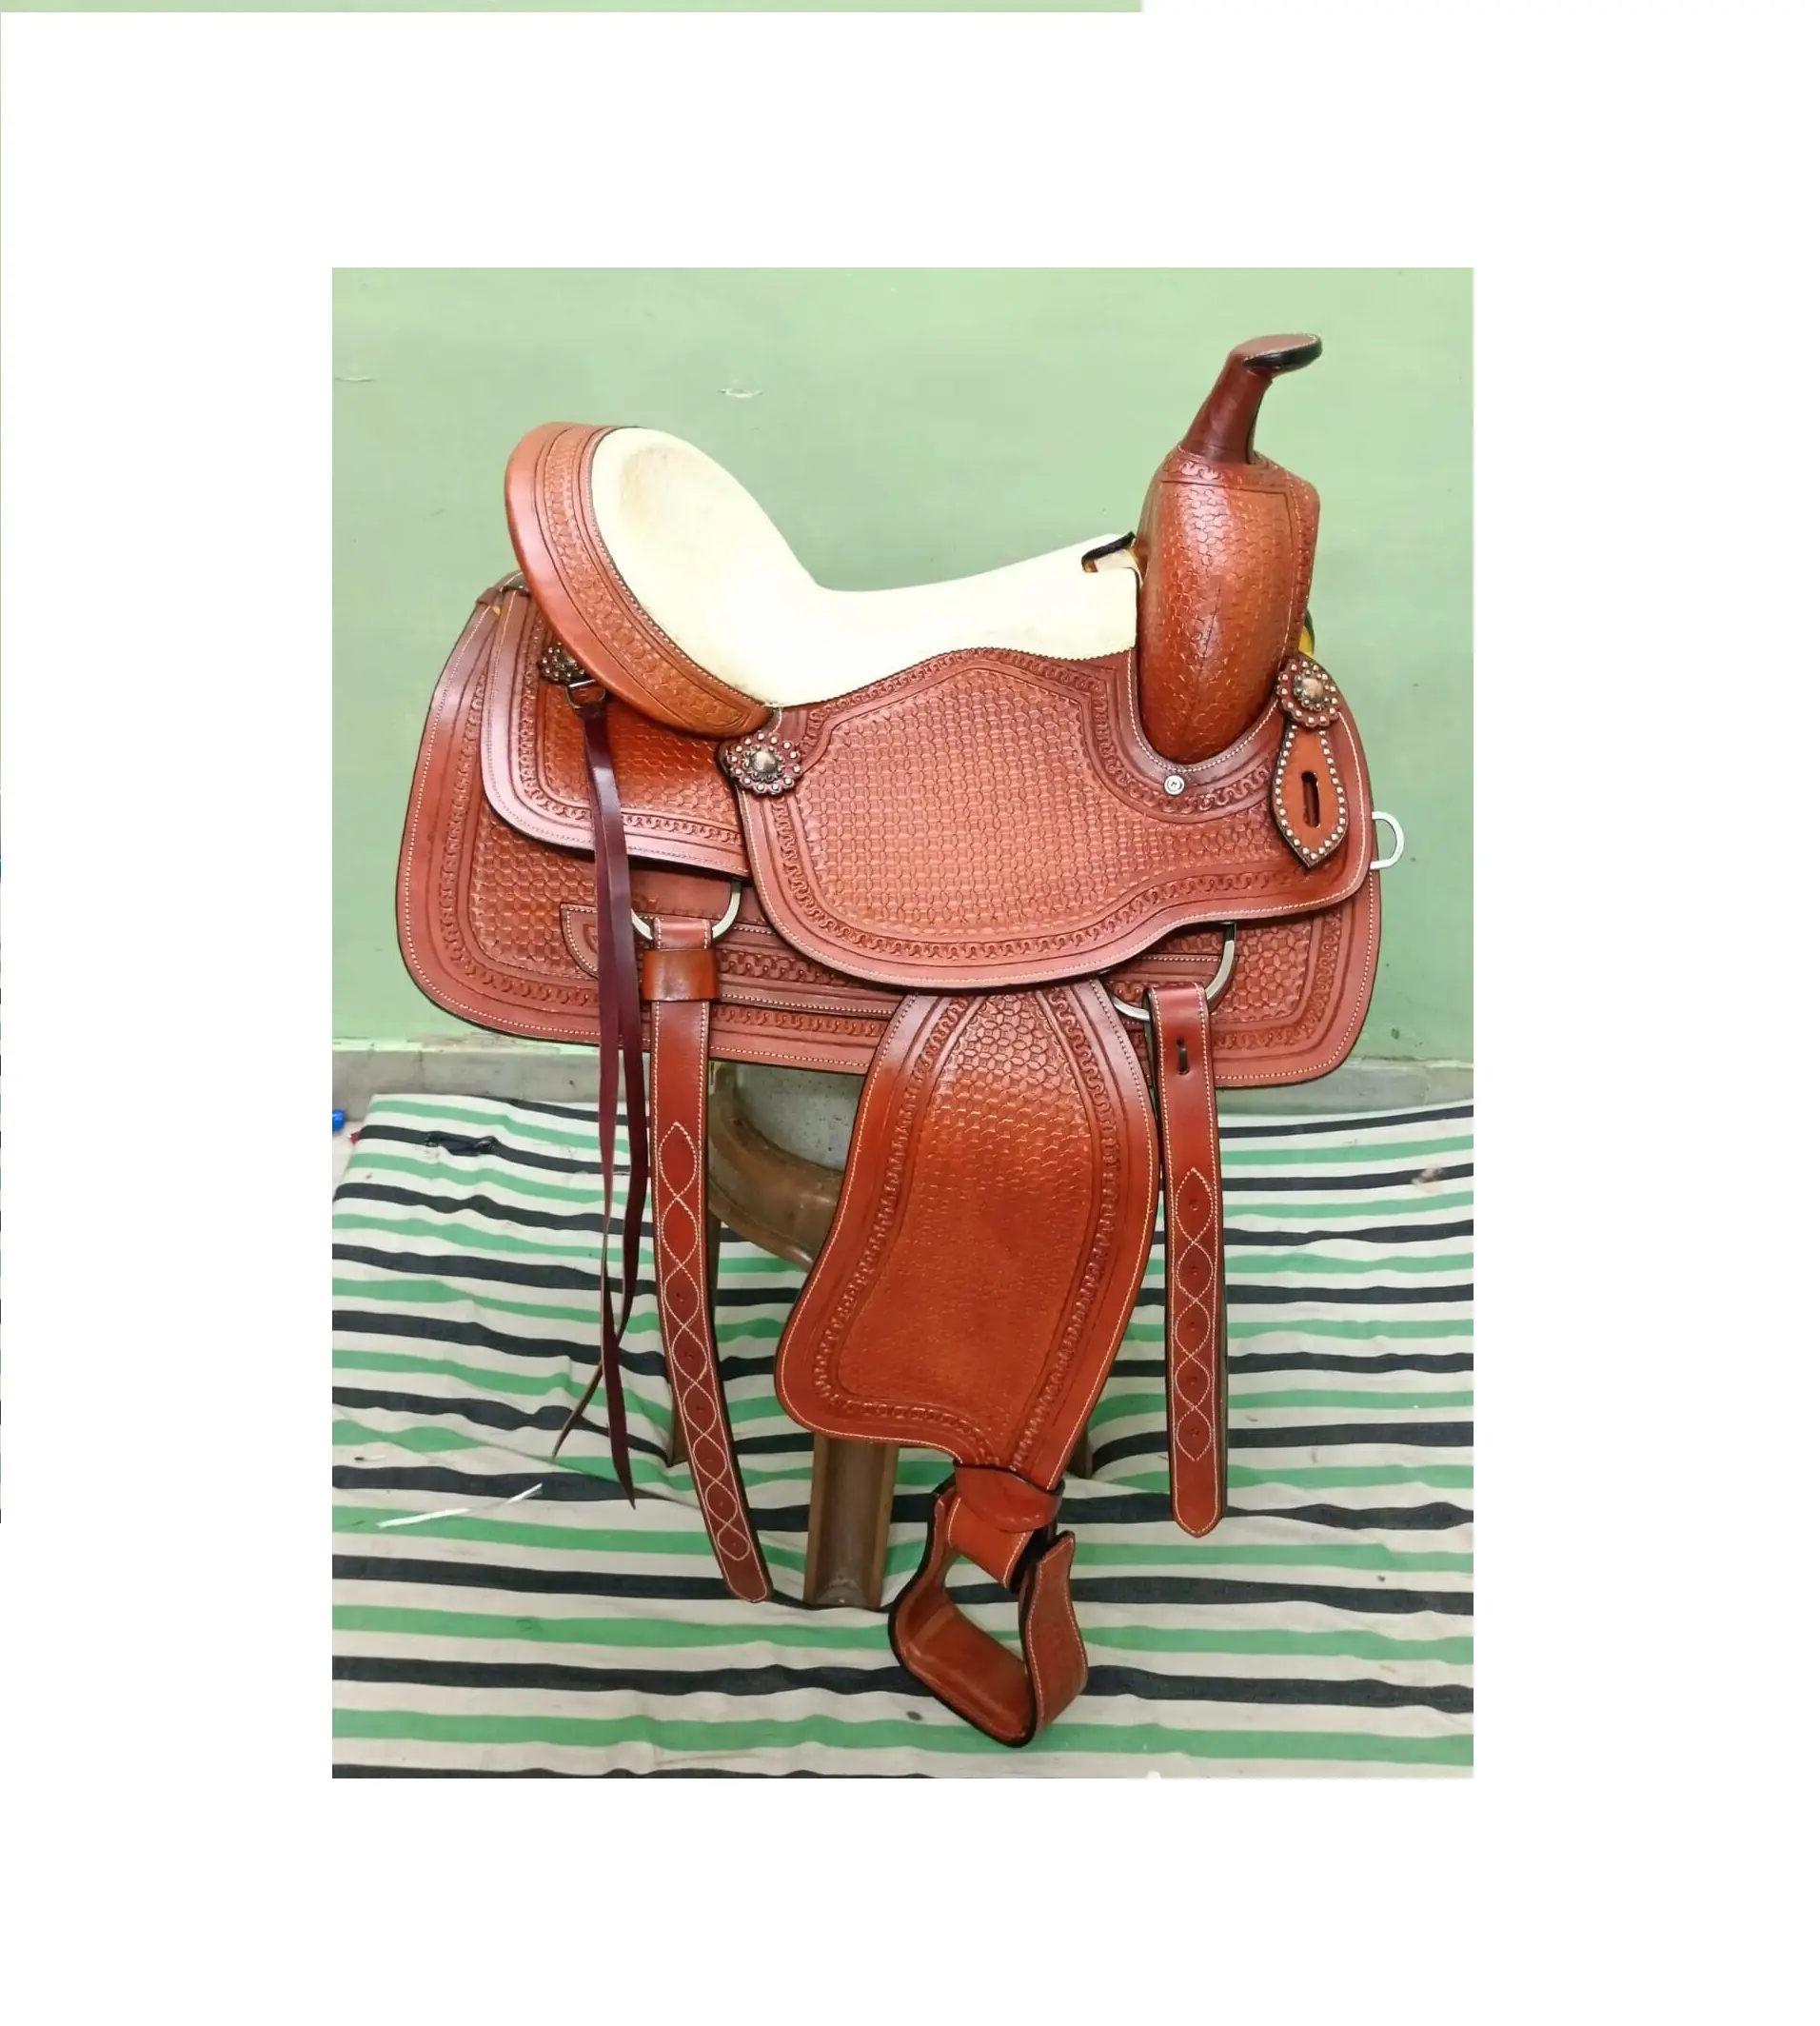 New Western Leather Carved White Seat Trail Pleasure Horse Saddle With Set All sizes Available at Affordable Price